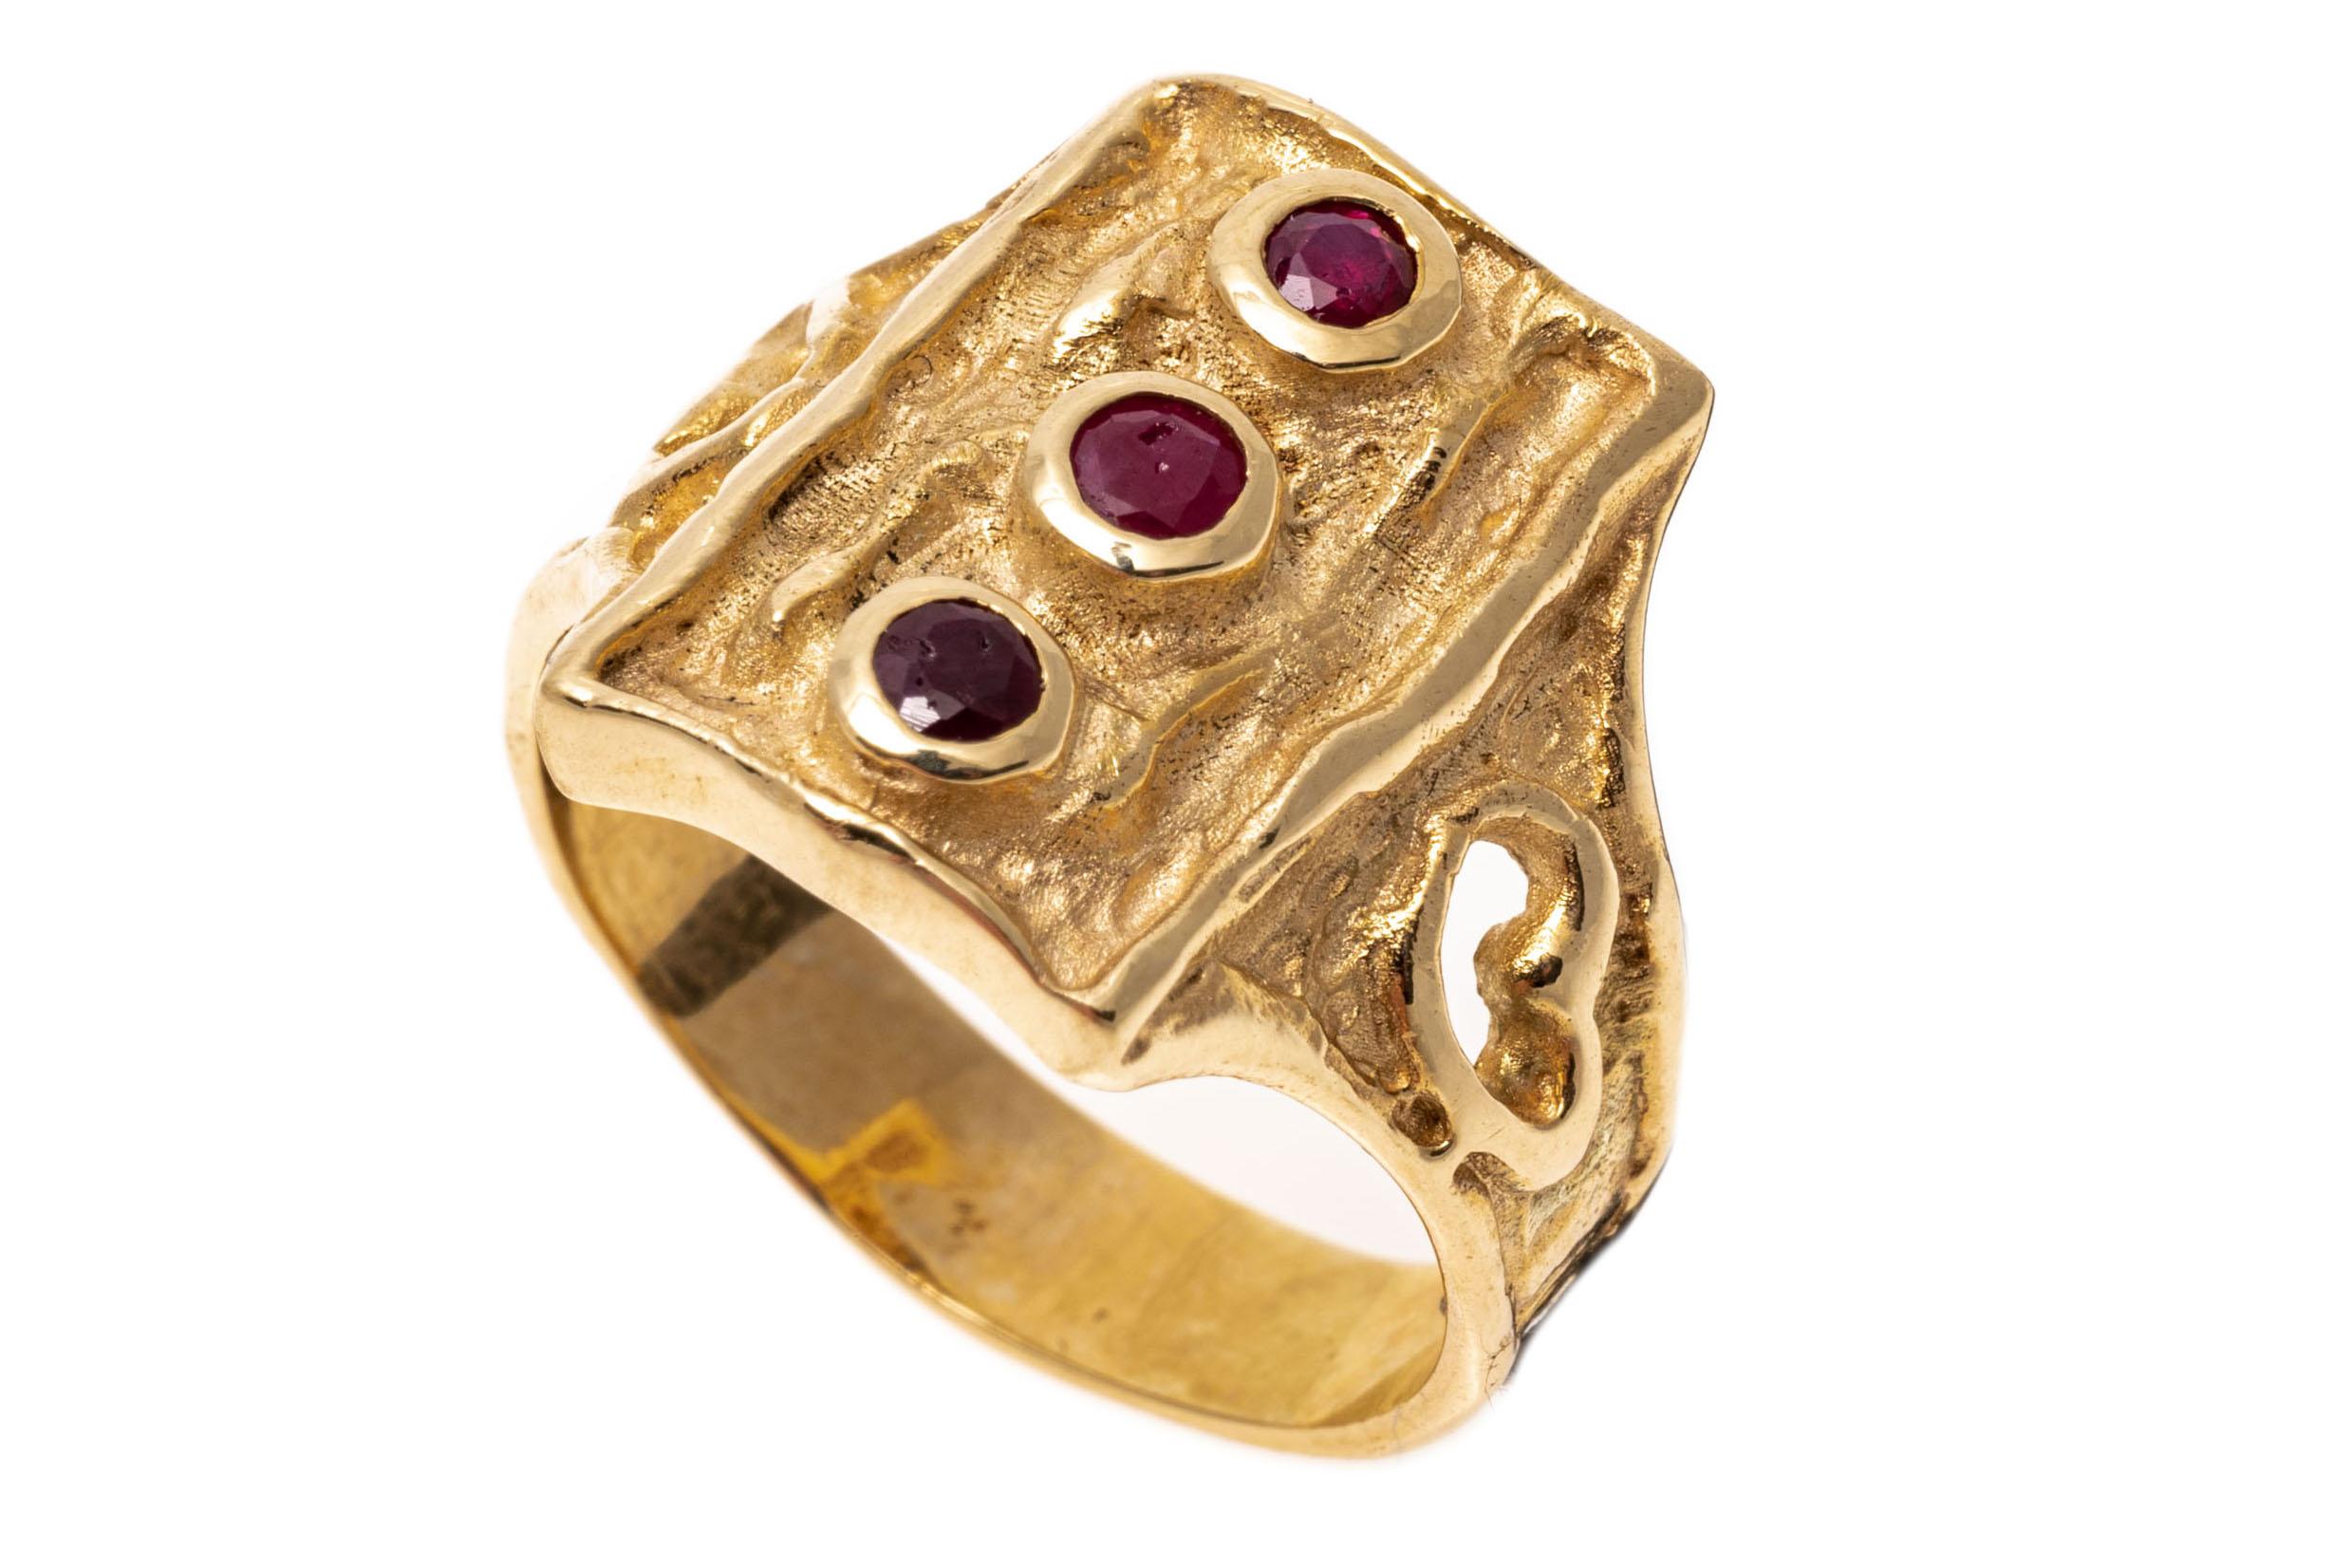 14k Gold Free Form Rectangular Ruby Set Ring With Melted Patterning, Size 7.75 In Good Condition For Sale In Southport, CT